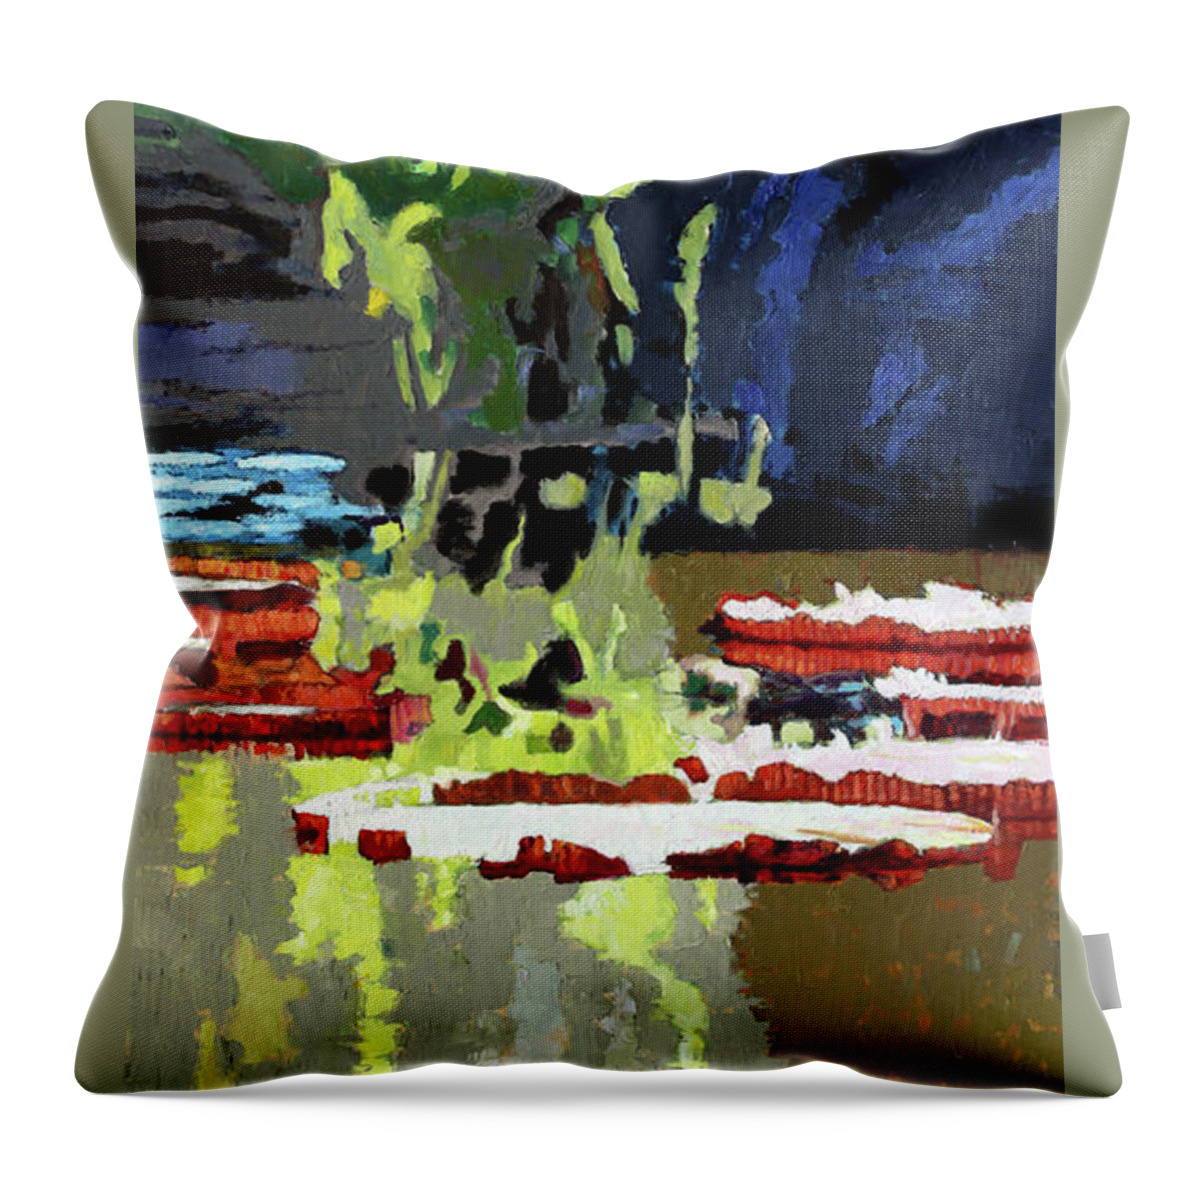 Garden Pond Throw Pillow featuring the painting Color Patterns on Lily Pond by John Lautermilch